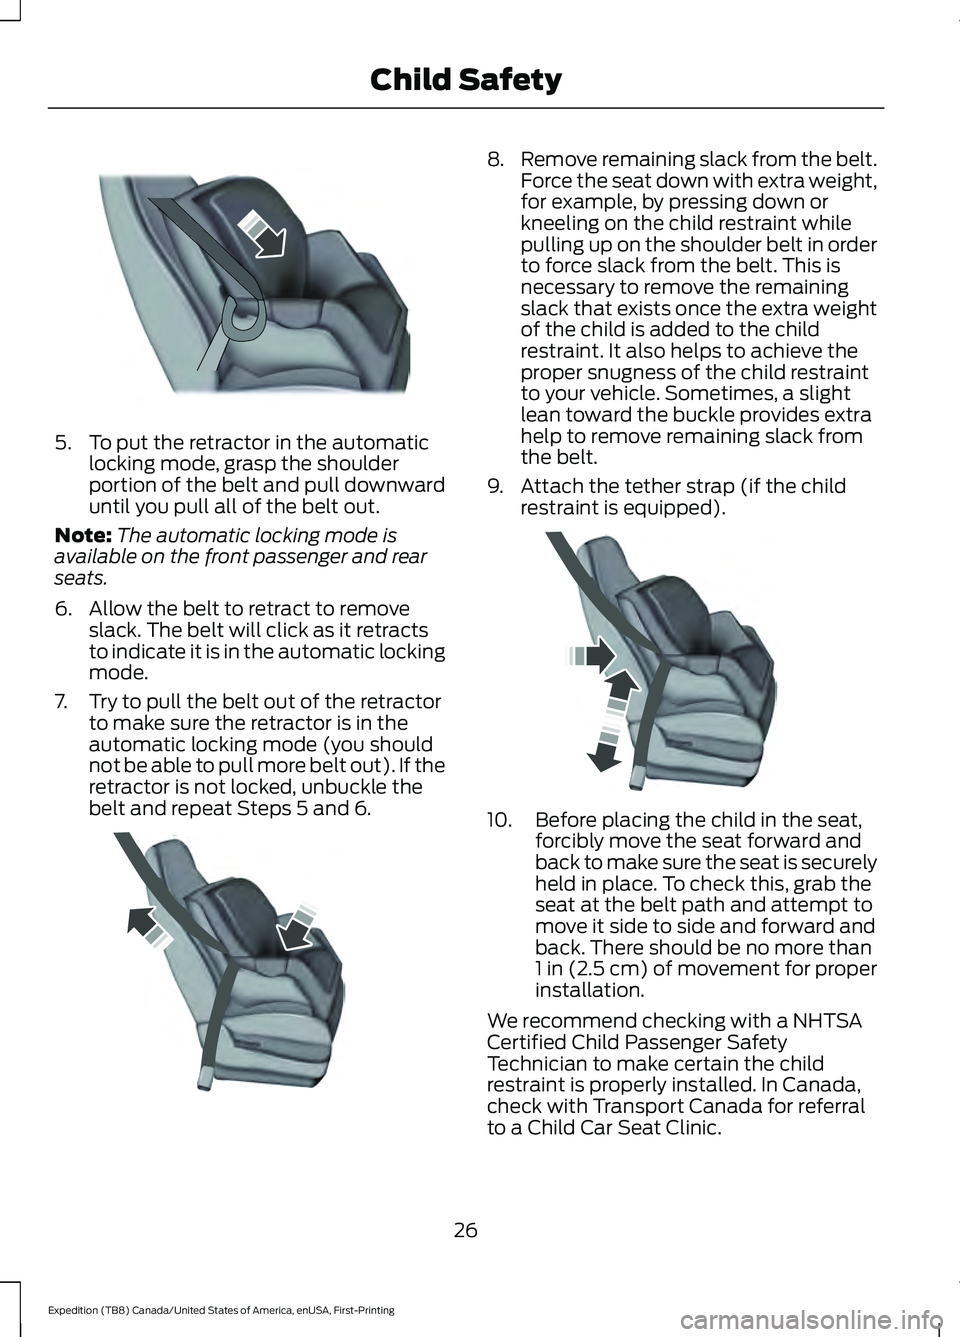 FORD EXPEDITION 2021  Owners Manual 5. To put the retractor in the automatic
locking mode, grasp the shoulder
portion of the belt and pull downward
until you pull all of the belt out.
Note: The automatic locking mode is
available on the